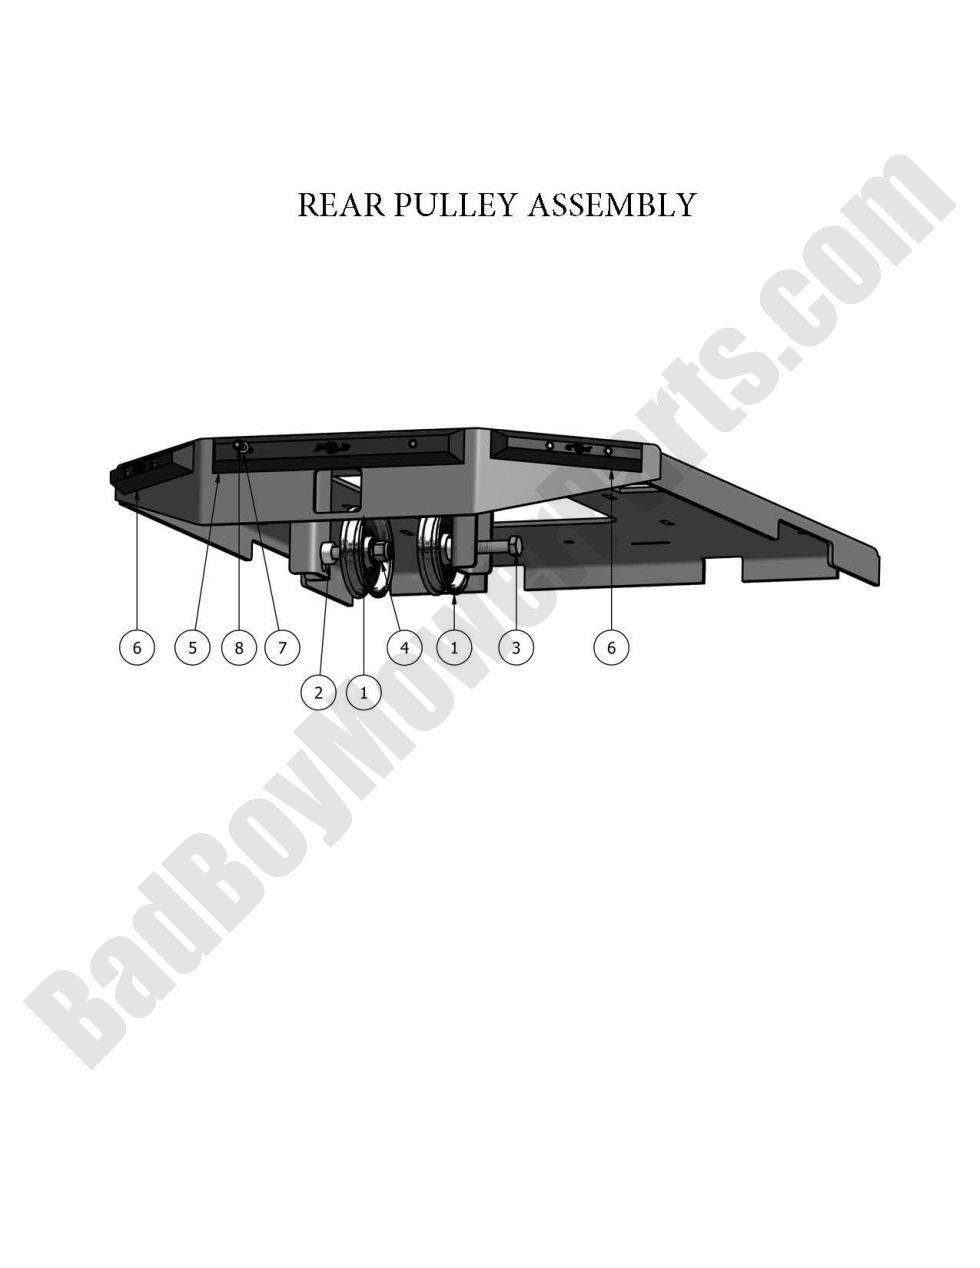 2010 Compact Diesel Rear Pulley Assembly